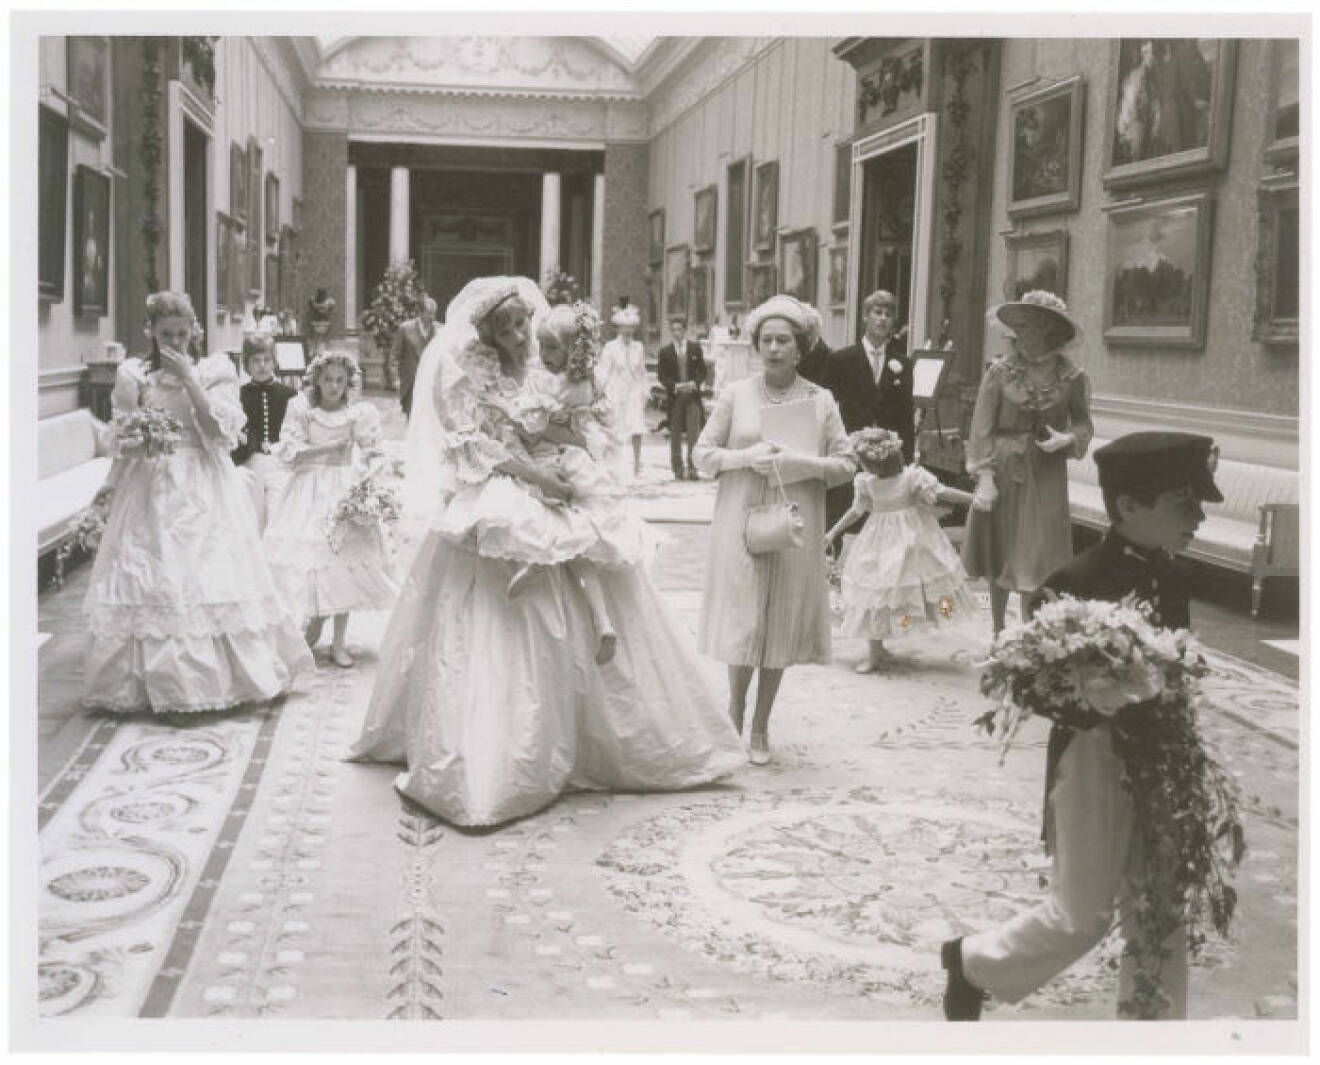 A collection of 12 unpublished behind the scenes photographs from the wedding of Princess Diana and Prince Charles are set to sell for *** when they go under the hammer. The pictures were taken at their reception at Buckingham Palace on July 29 1981 after their wedding ceremony at St. Paul's Cathedral. They originate from the collection of a an assistant to photographer Patrick Lichfield and include seven black and white pictures and five color, as well as the assistant's access pass to the palace. Six of the larger photos depict Princess Diana wearing her gorgeous wedding dress with members of her family and wedding party, including Queen Elizabeth, Prince Charles, Princess Ann, Princess Margaret, and Prince Andrew. Three show Princess Diana holding the five-year-old Clementine Hambro, her youngest bridesmaid; one shows her setting Clementine down; and another shows her smiling as Prince Andrew leans over to talk to Clementine. Queen Elizabeth is clearly visible walking alongside Princess Diana in four of the images, and the Queen Mother is seen in two. Prince Charles is also in two of these photographs. The last of the photos is the most striking of all, depicting Princess Diana and Prince Charles from behind on the famous balcony overlooking the massive crowds gathered on the Mall in front of Buckingham Palace. The lot will be sold by RR Auction in Cambridge, MA, on September 24 2015. Ref: SPL1098968 100815 Picture by: RR Auction / Splash News Splash News and Pictures Los Angeles: 310-821-2666 New York: 212-619-2666 London: 870-934-2666 photodesk@splashnews.com 